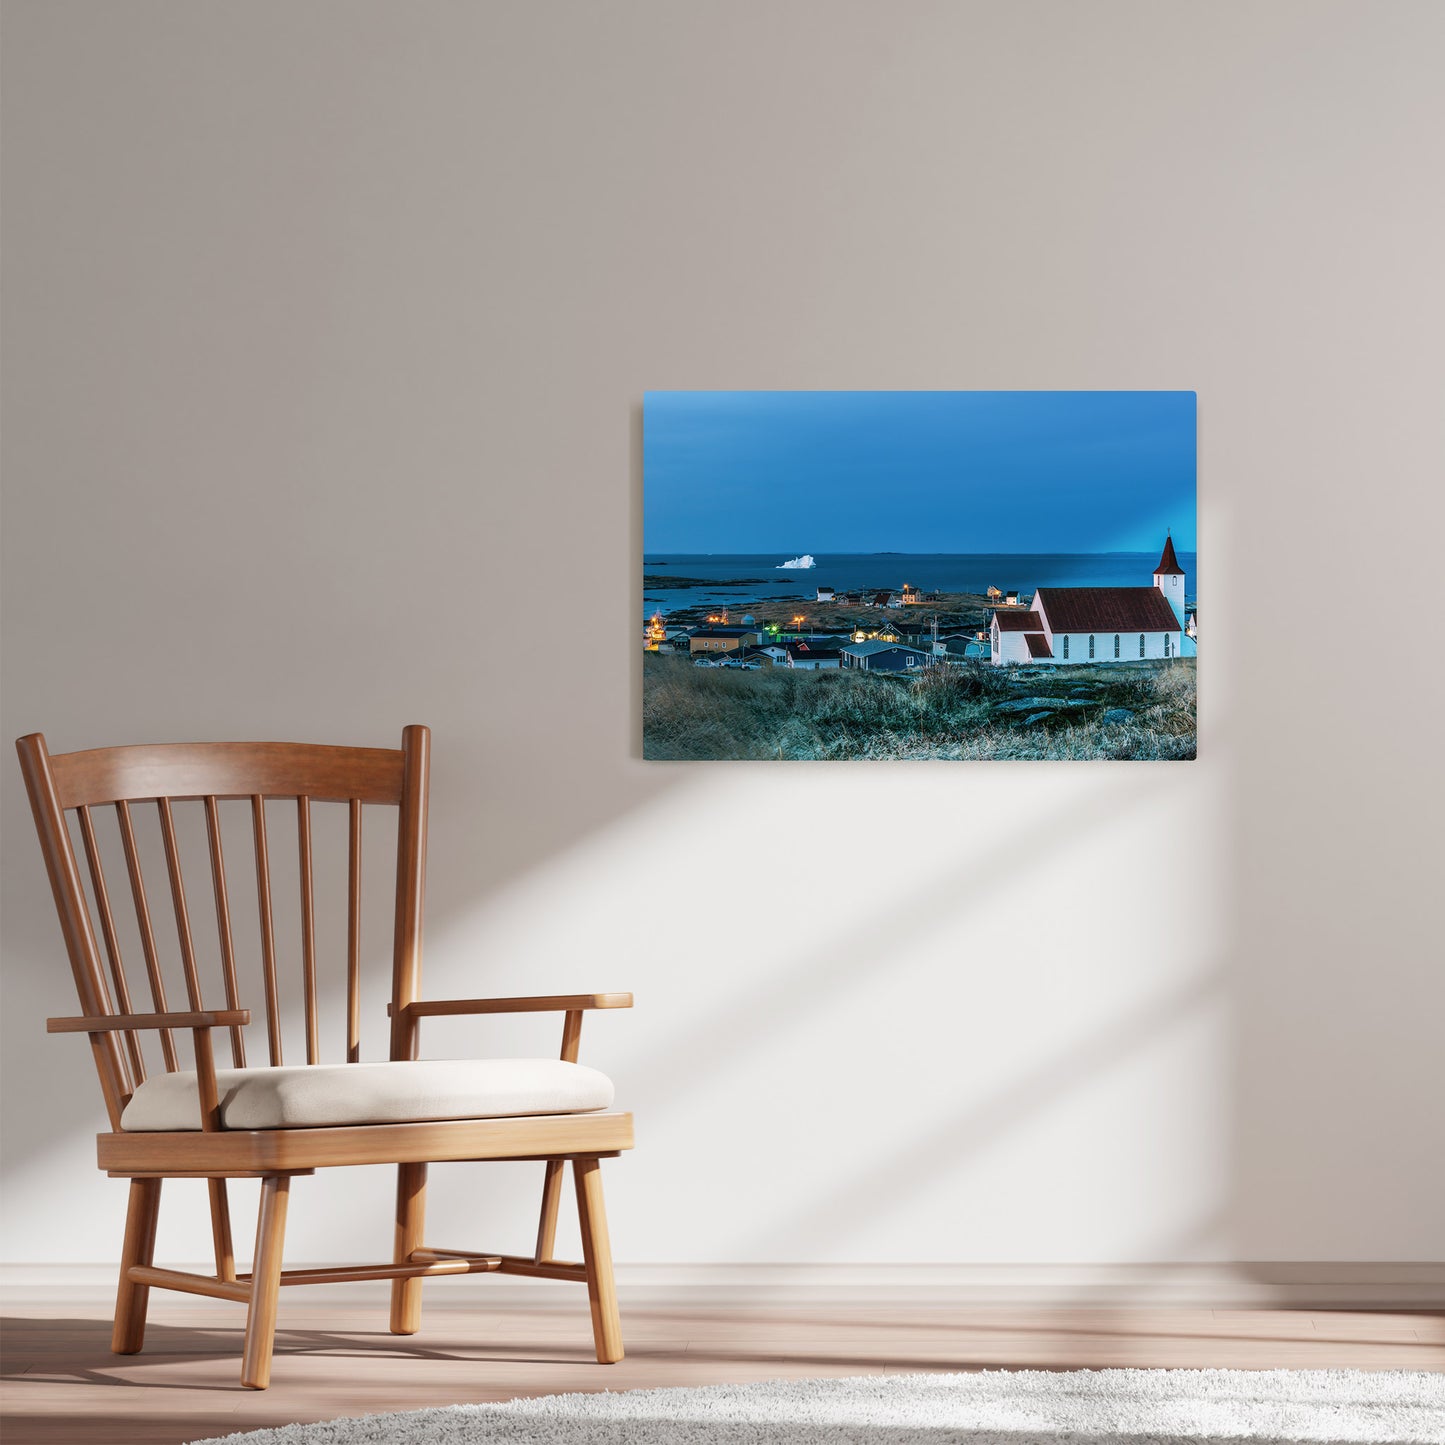 Ray Mackey's Greenspond Blue Hour photography reproduced on HD metal print and displayed on wall